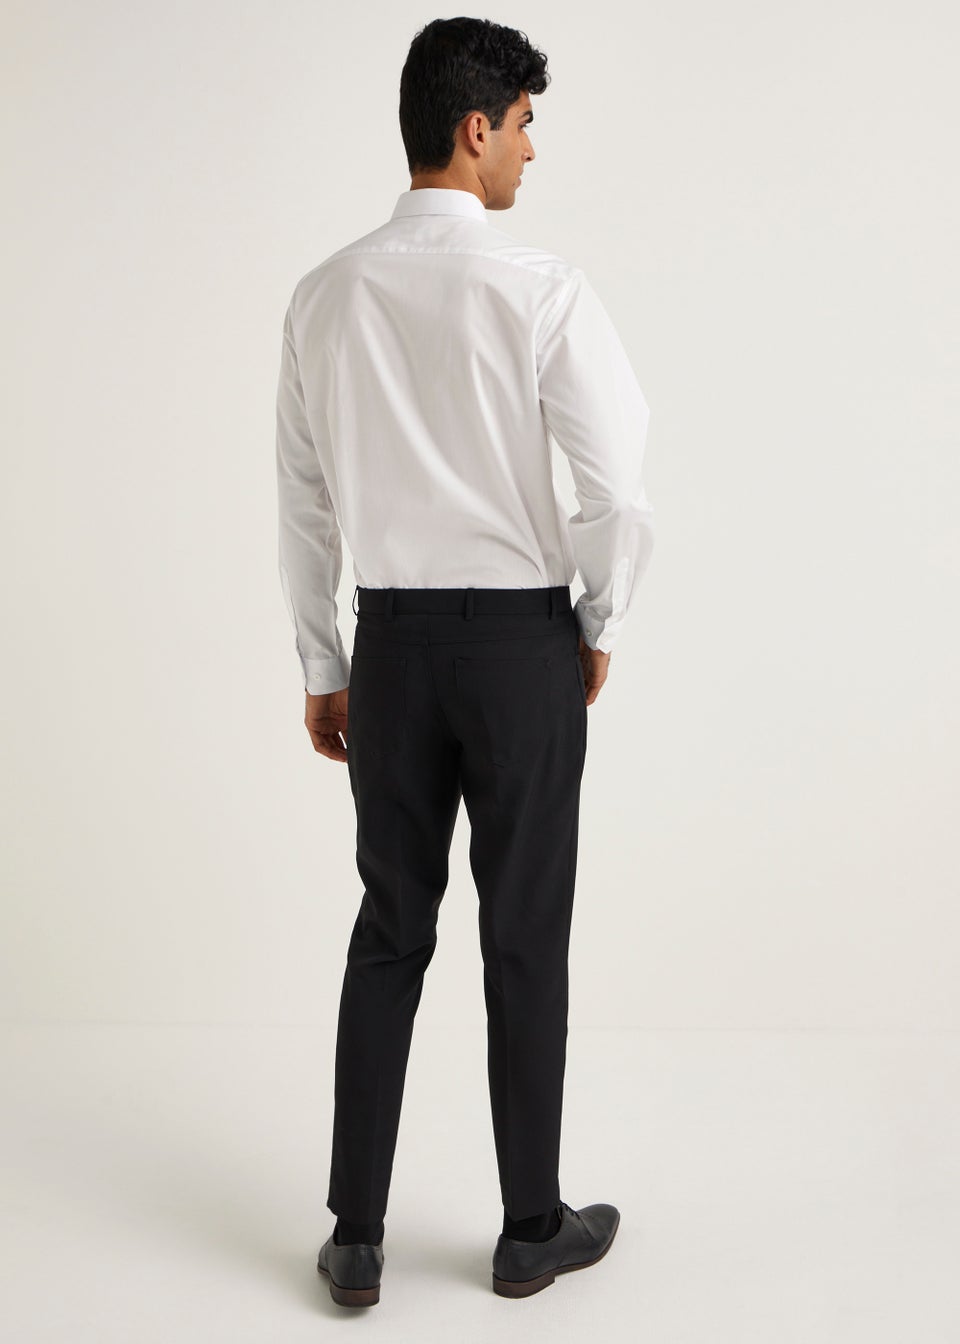 Taylor & Wright Black Slim Fit Formal Trousers